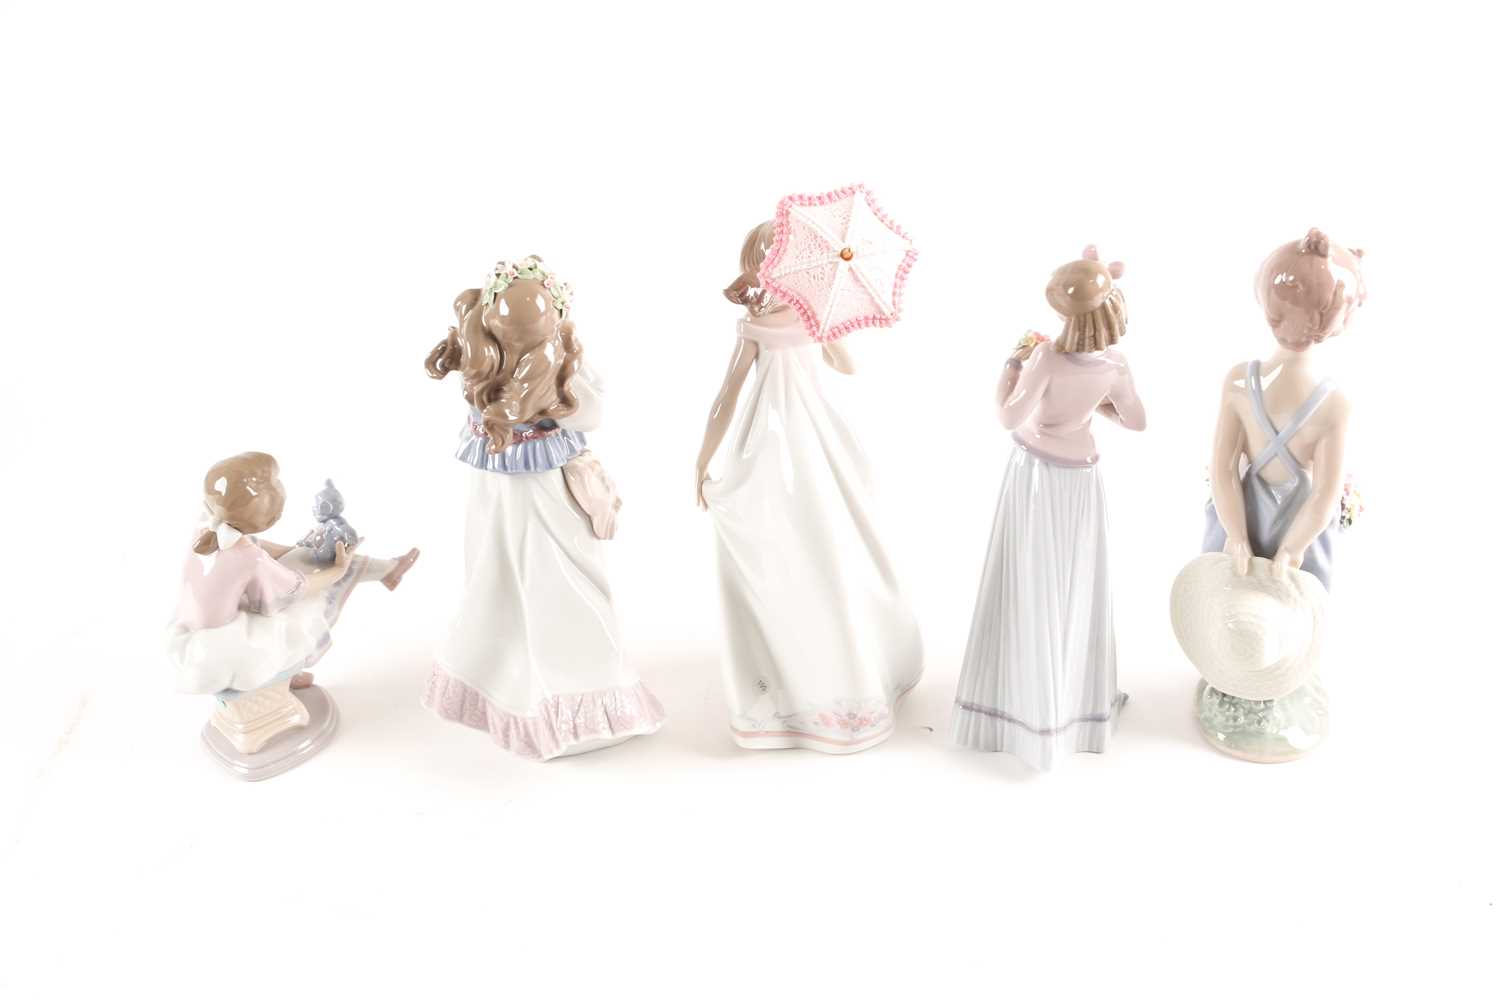 Five Lladro figures, Best Friend (07620), Pocket Full of Wishes (07650), Innocence in Bloom (07644), - Image 10 of 10